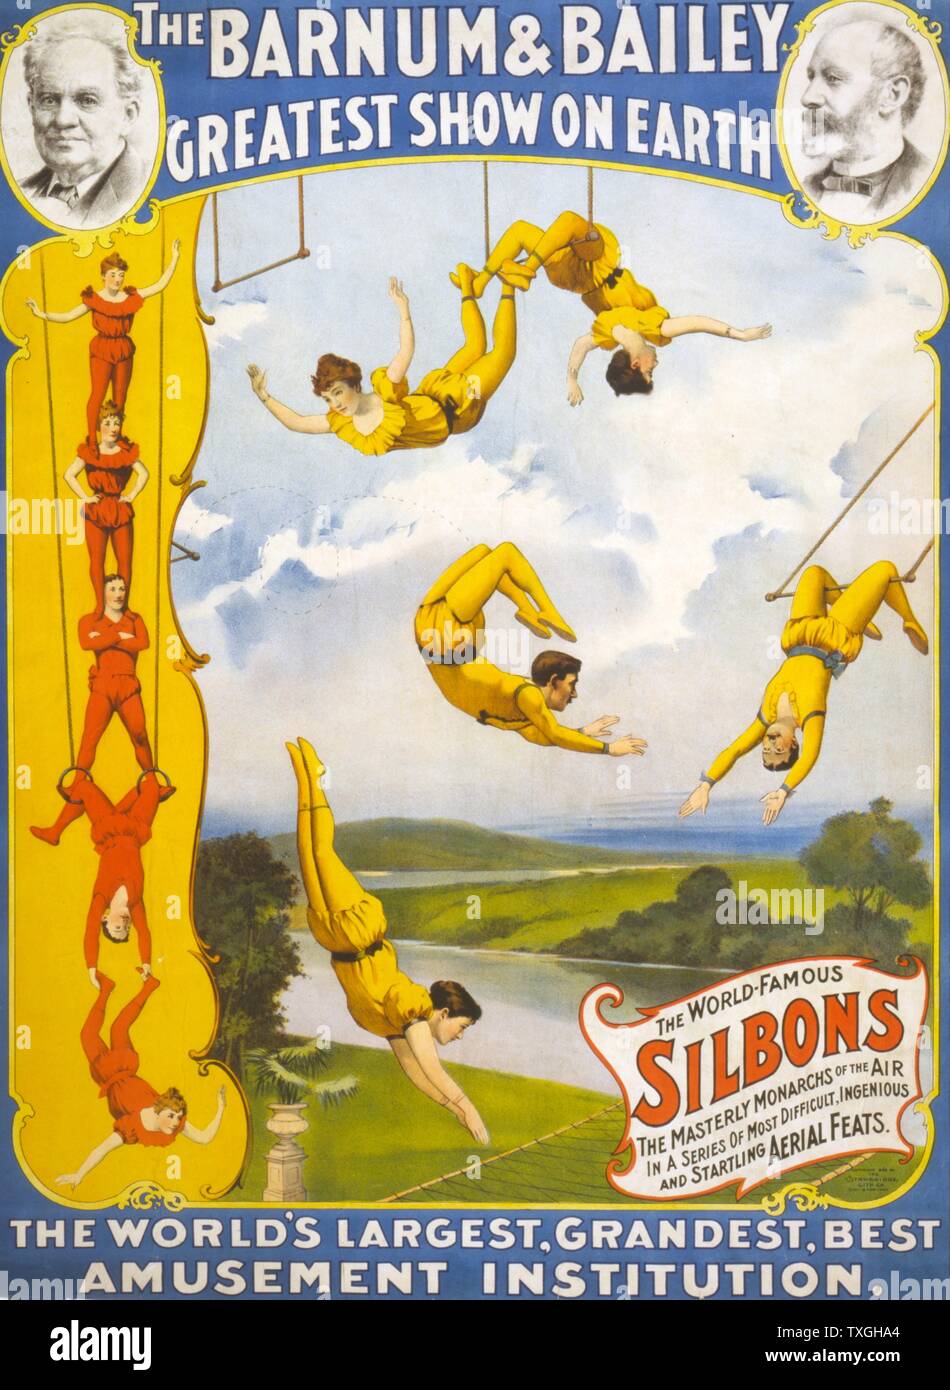 The Barnum & Bailey greatest show on earth c1896 : Circus poster showing trapeze artists. Stock Photo